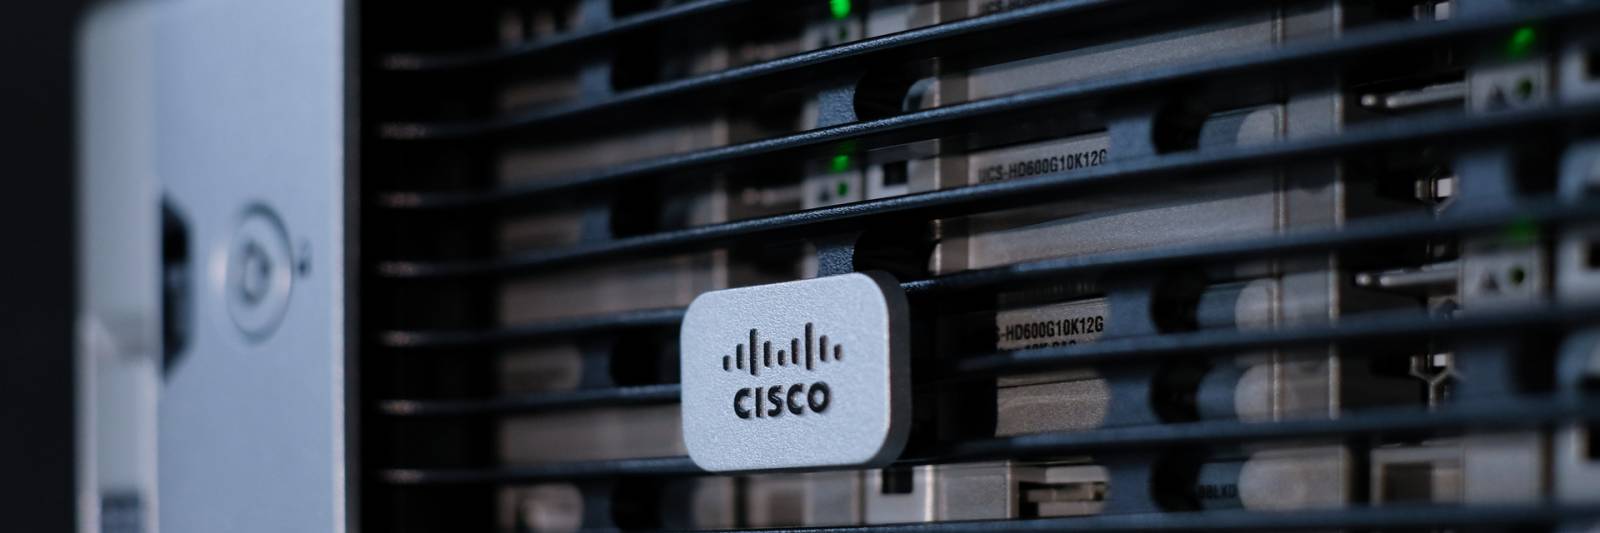 Cisco Patch Notes ‘left Out’ Details Of Rce Flaws